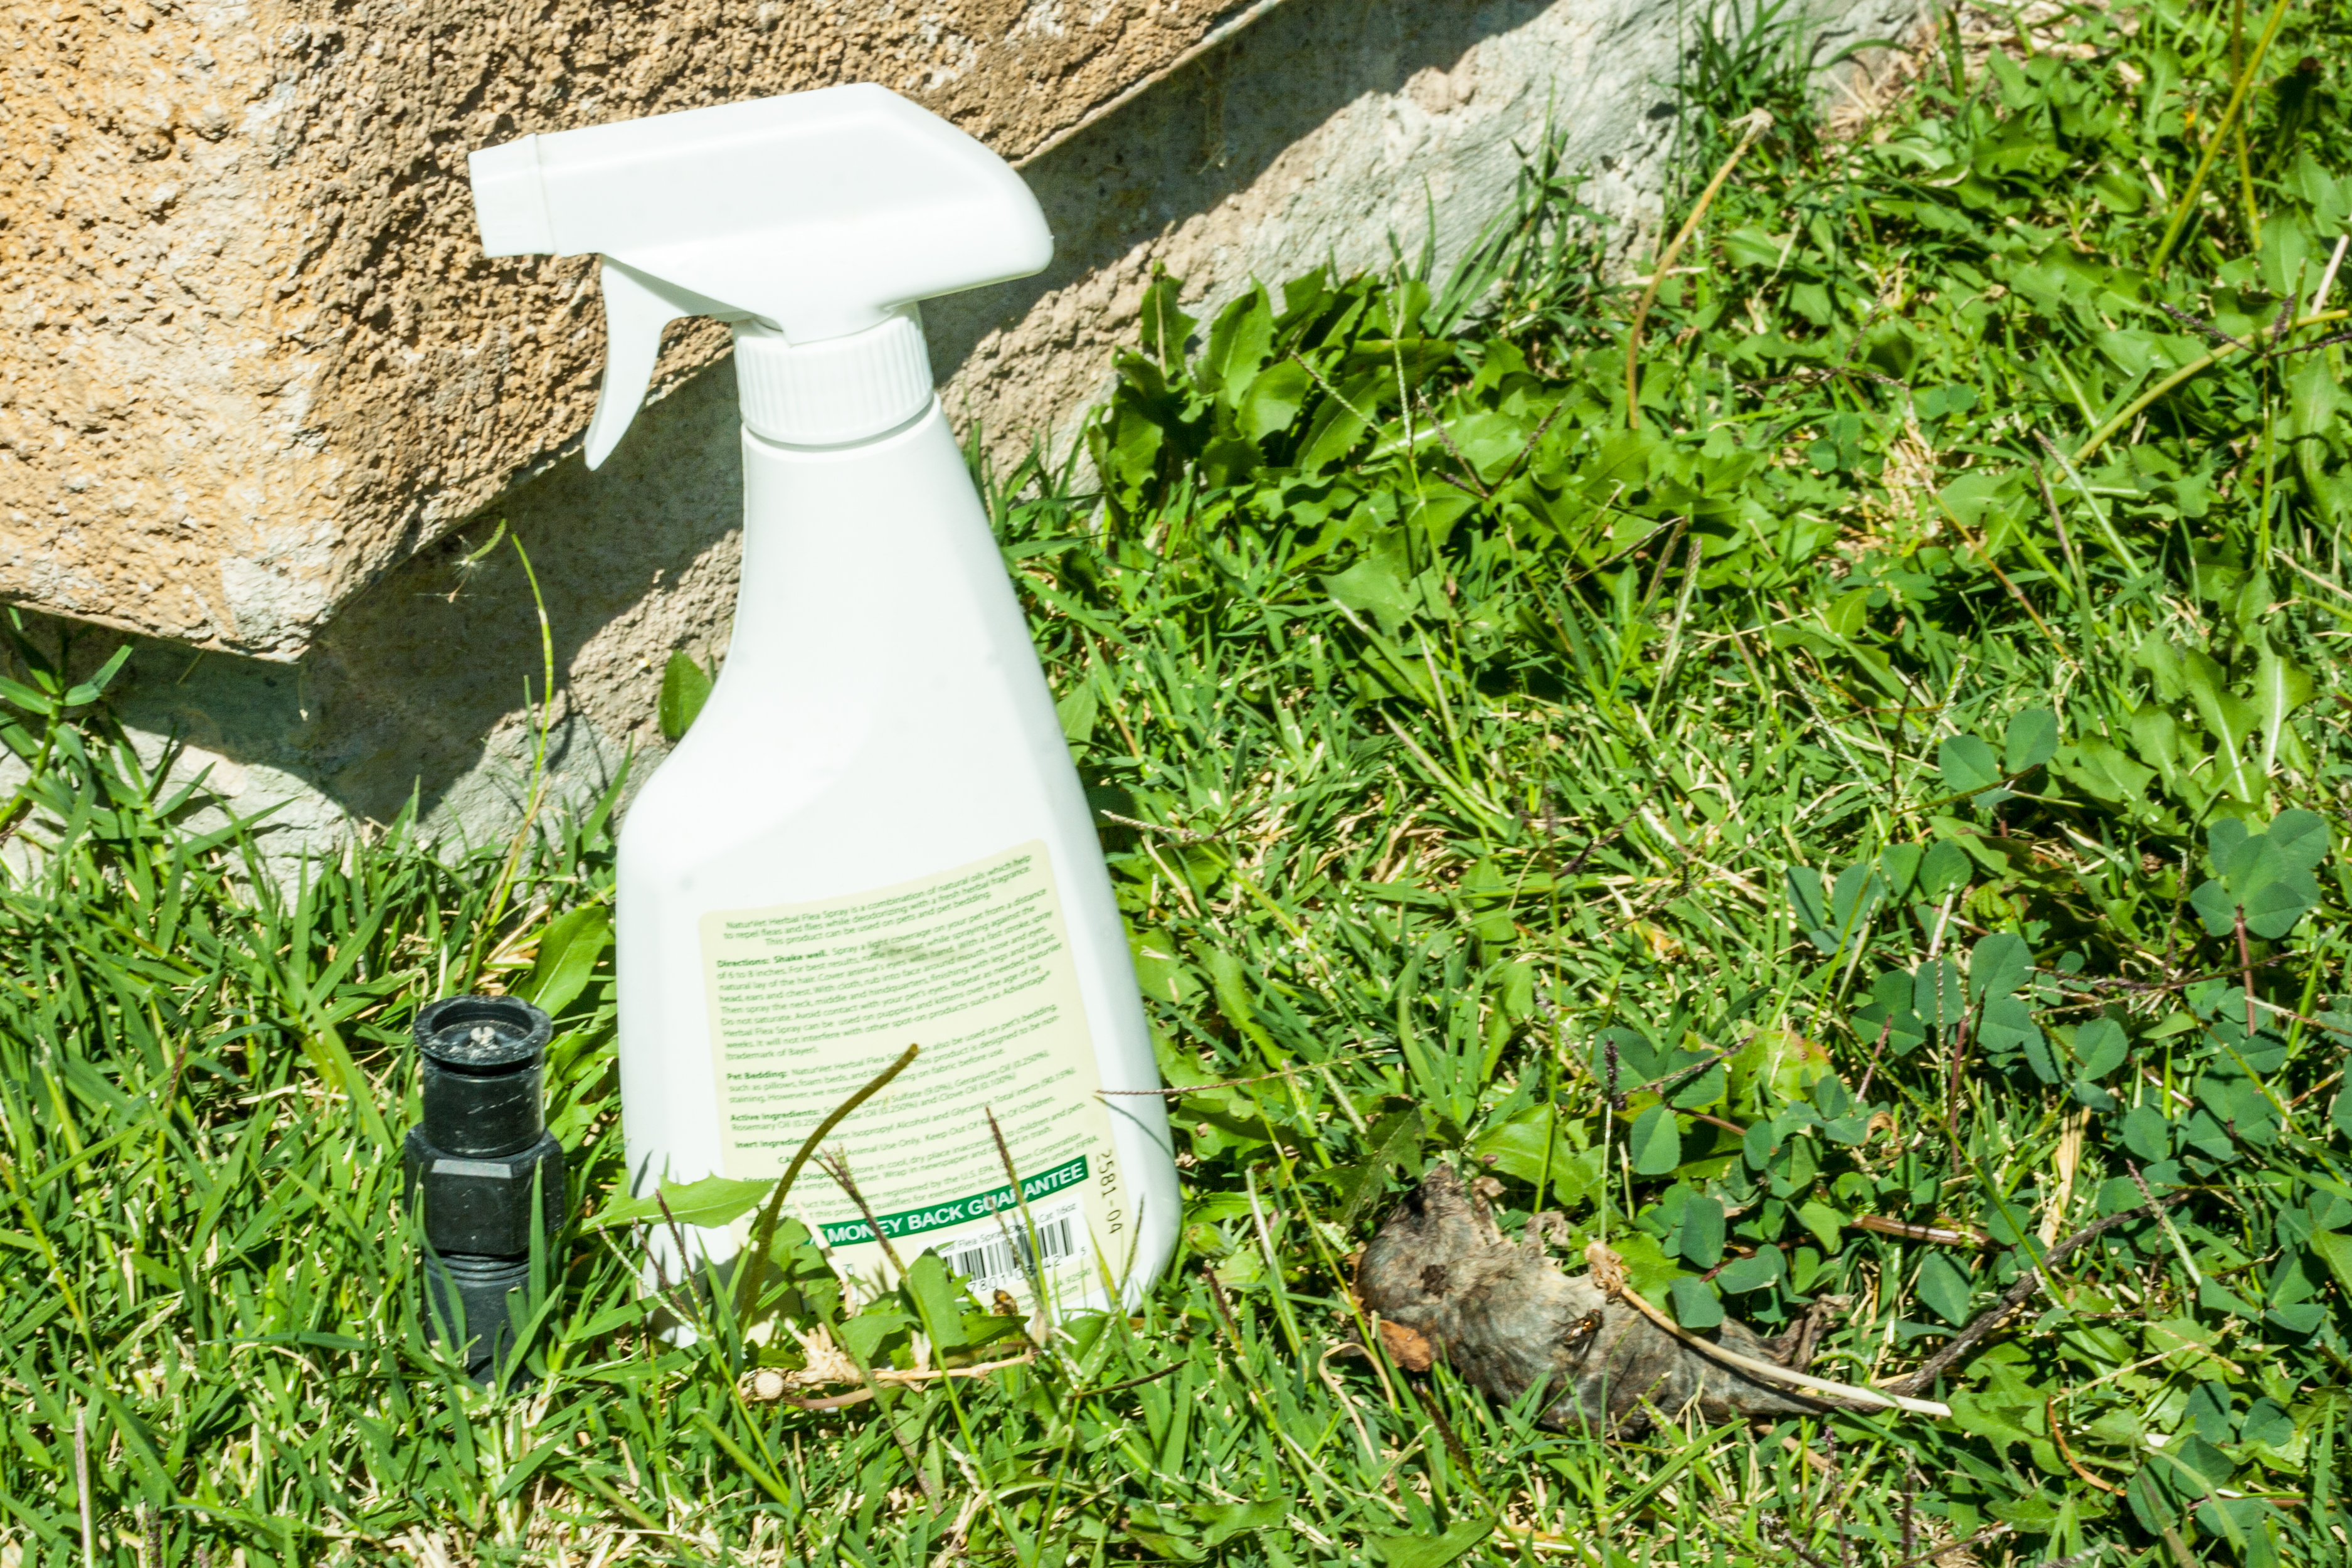 DIY Mouse Pest Control Products